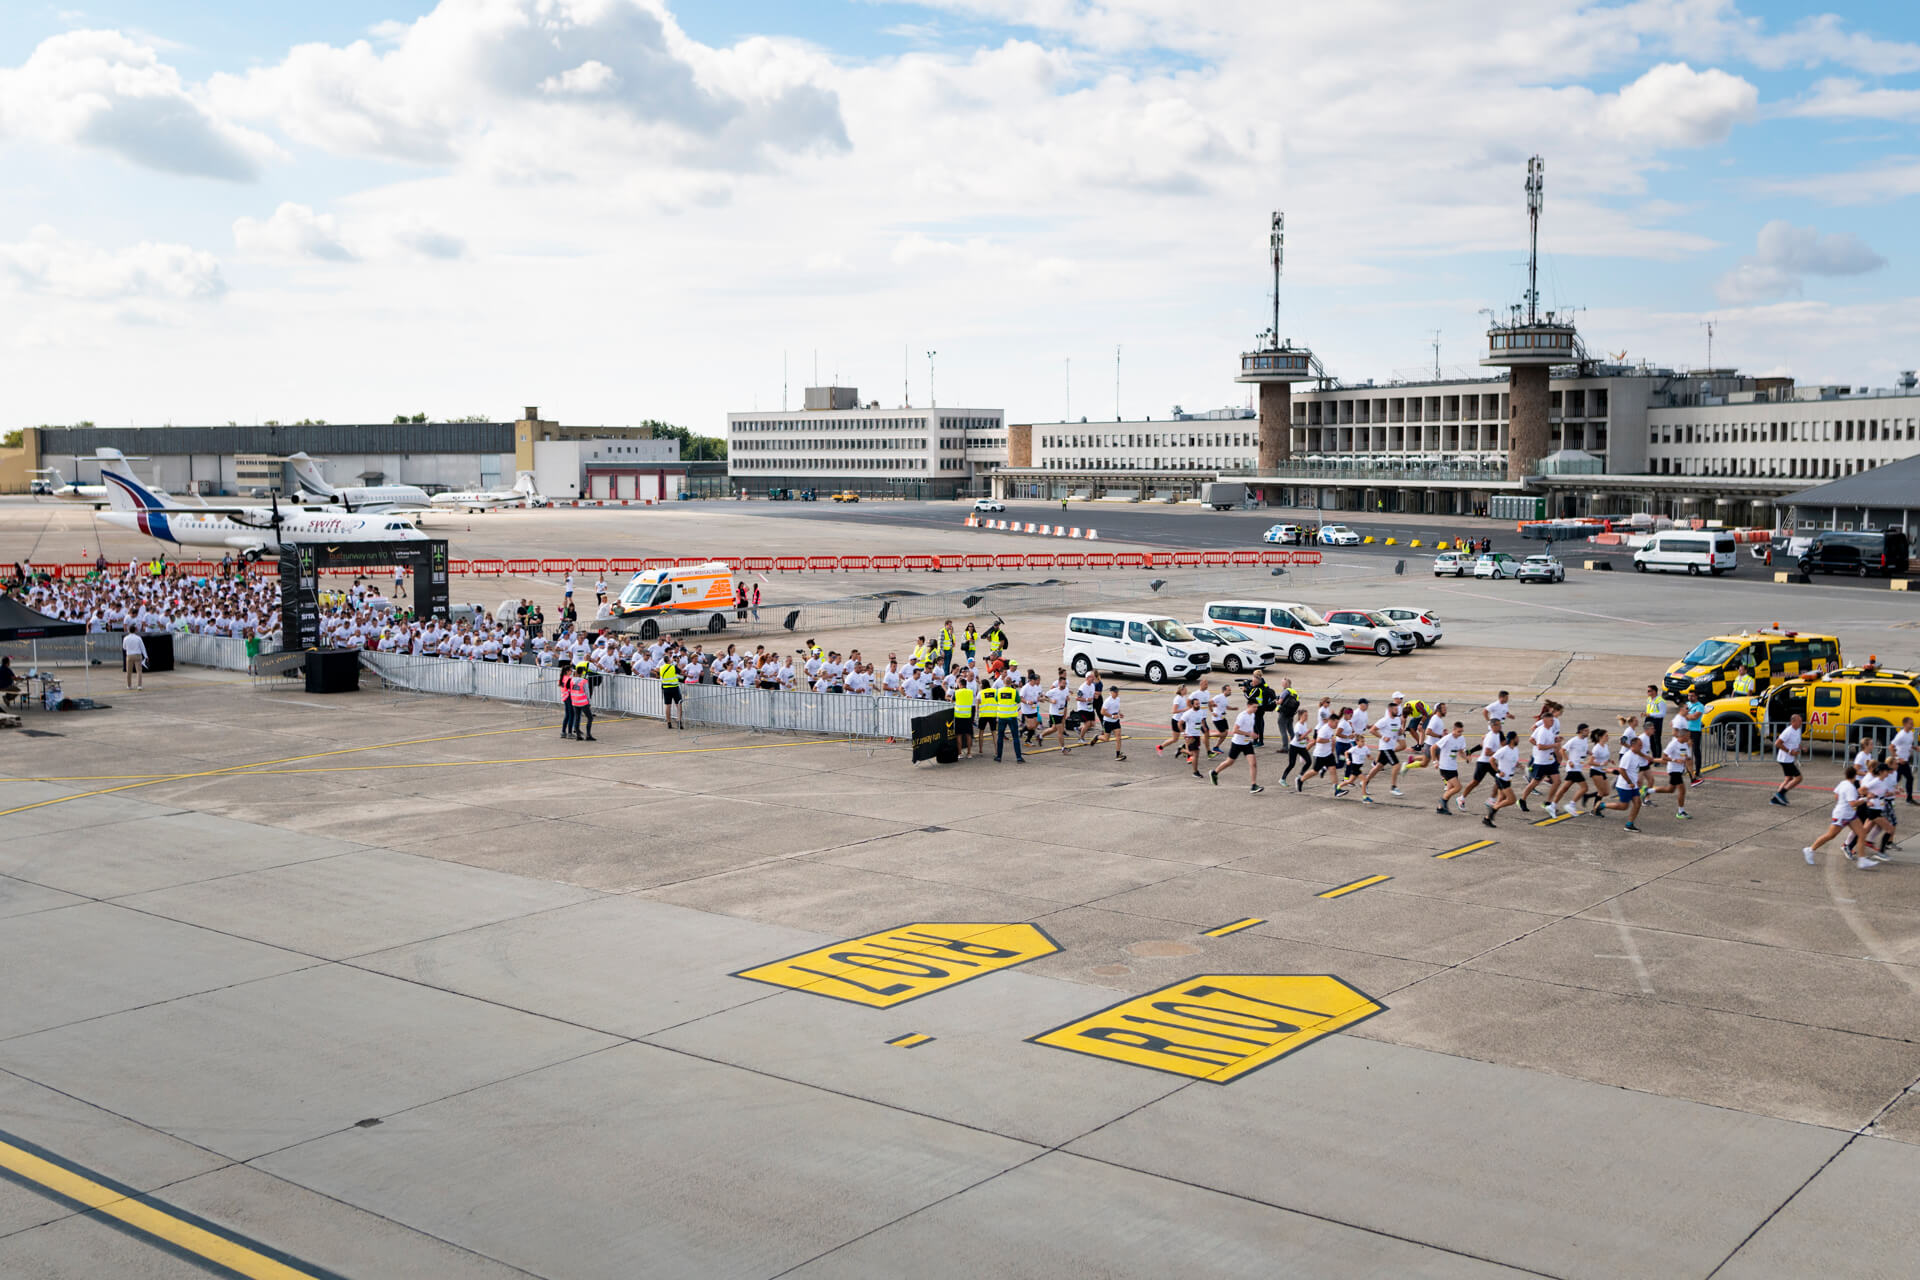 Runway Run: Athletes to Race at Budapest Airport Again this August